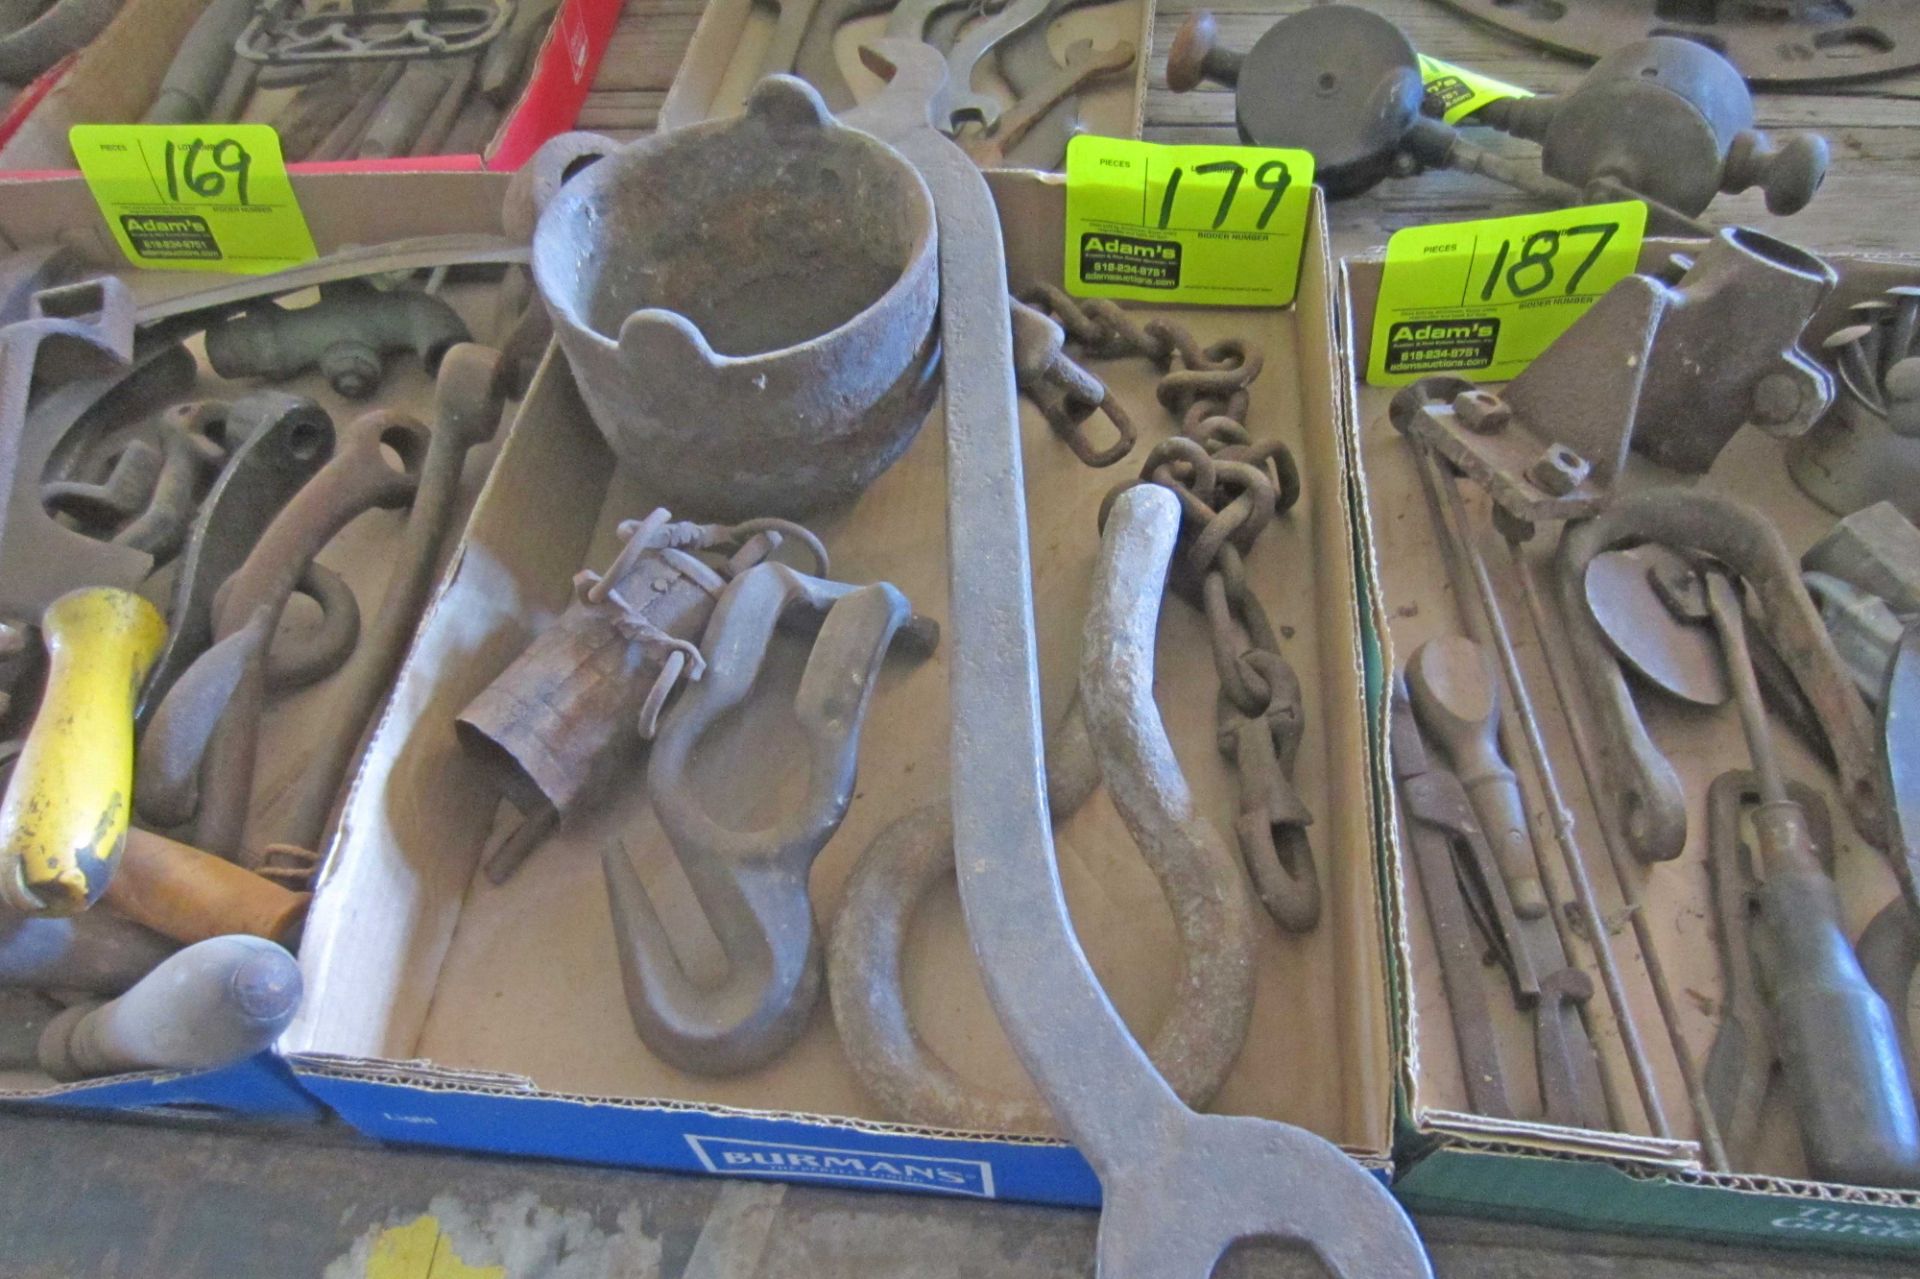 Wrench, Clevises, Cast Iron Pot, Bell, etc